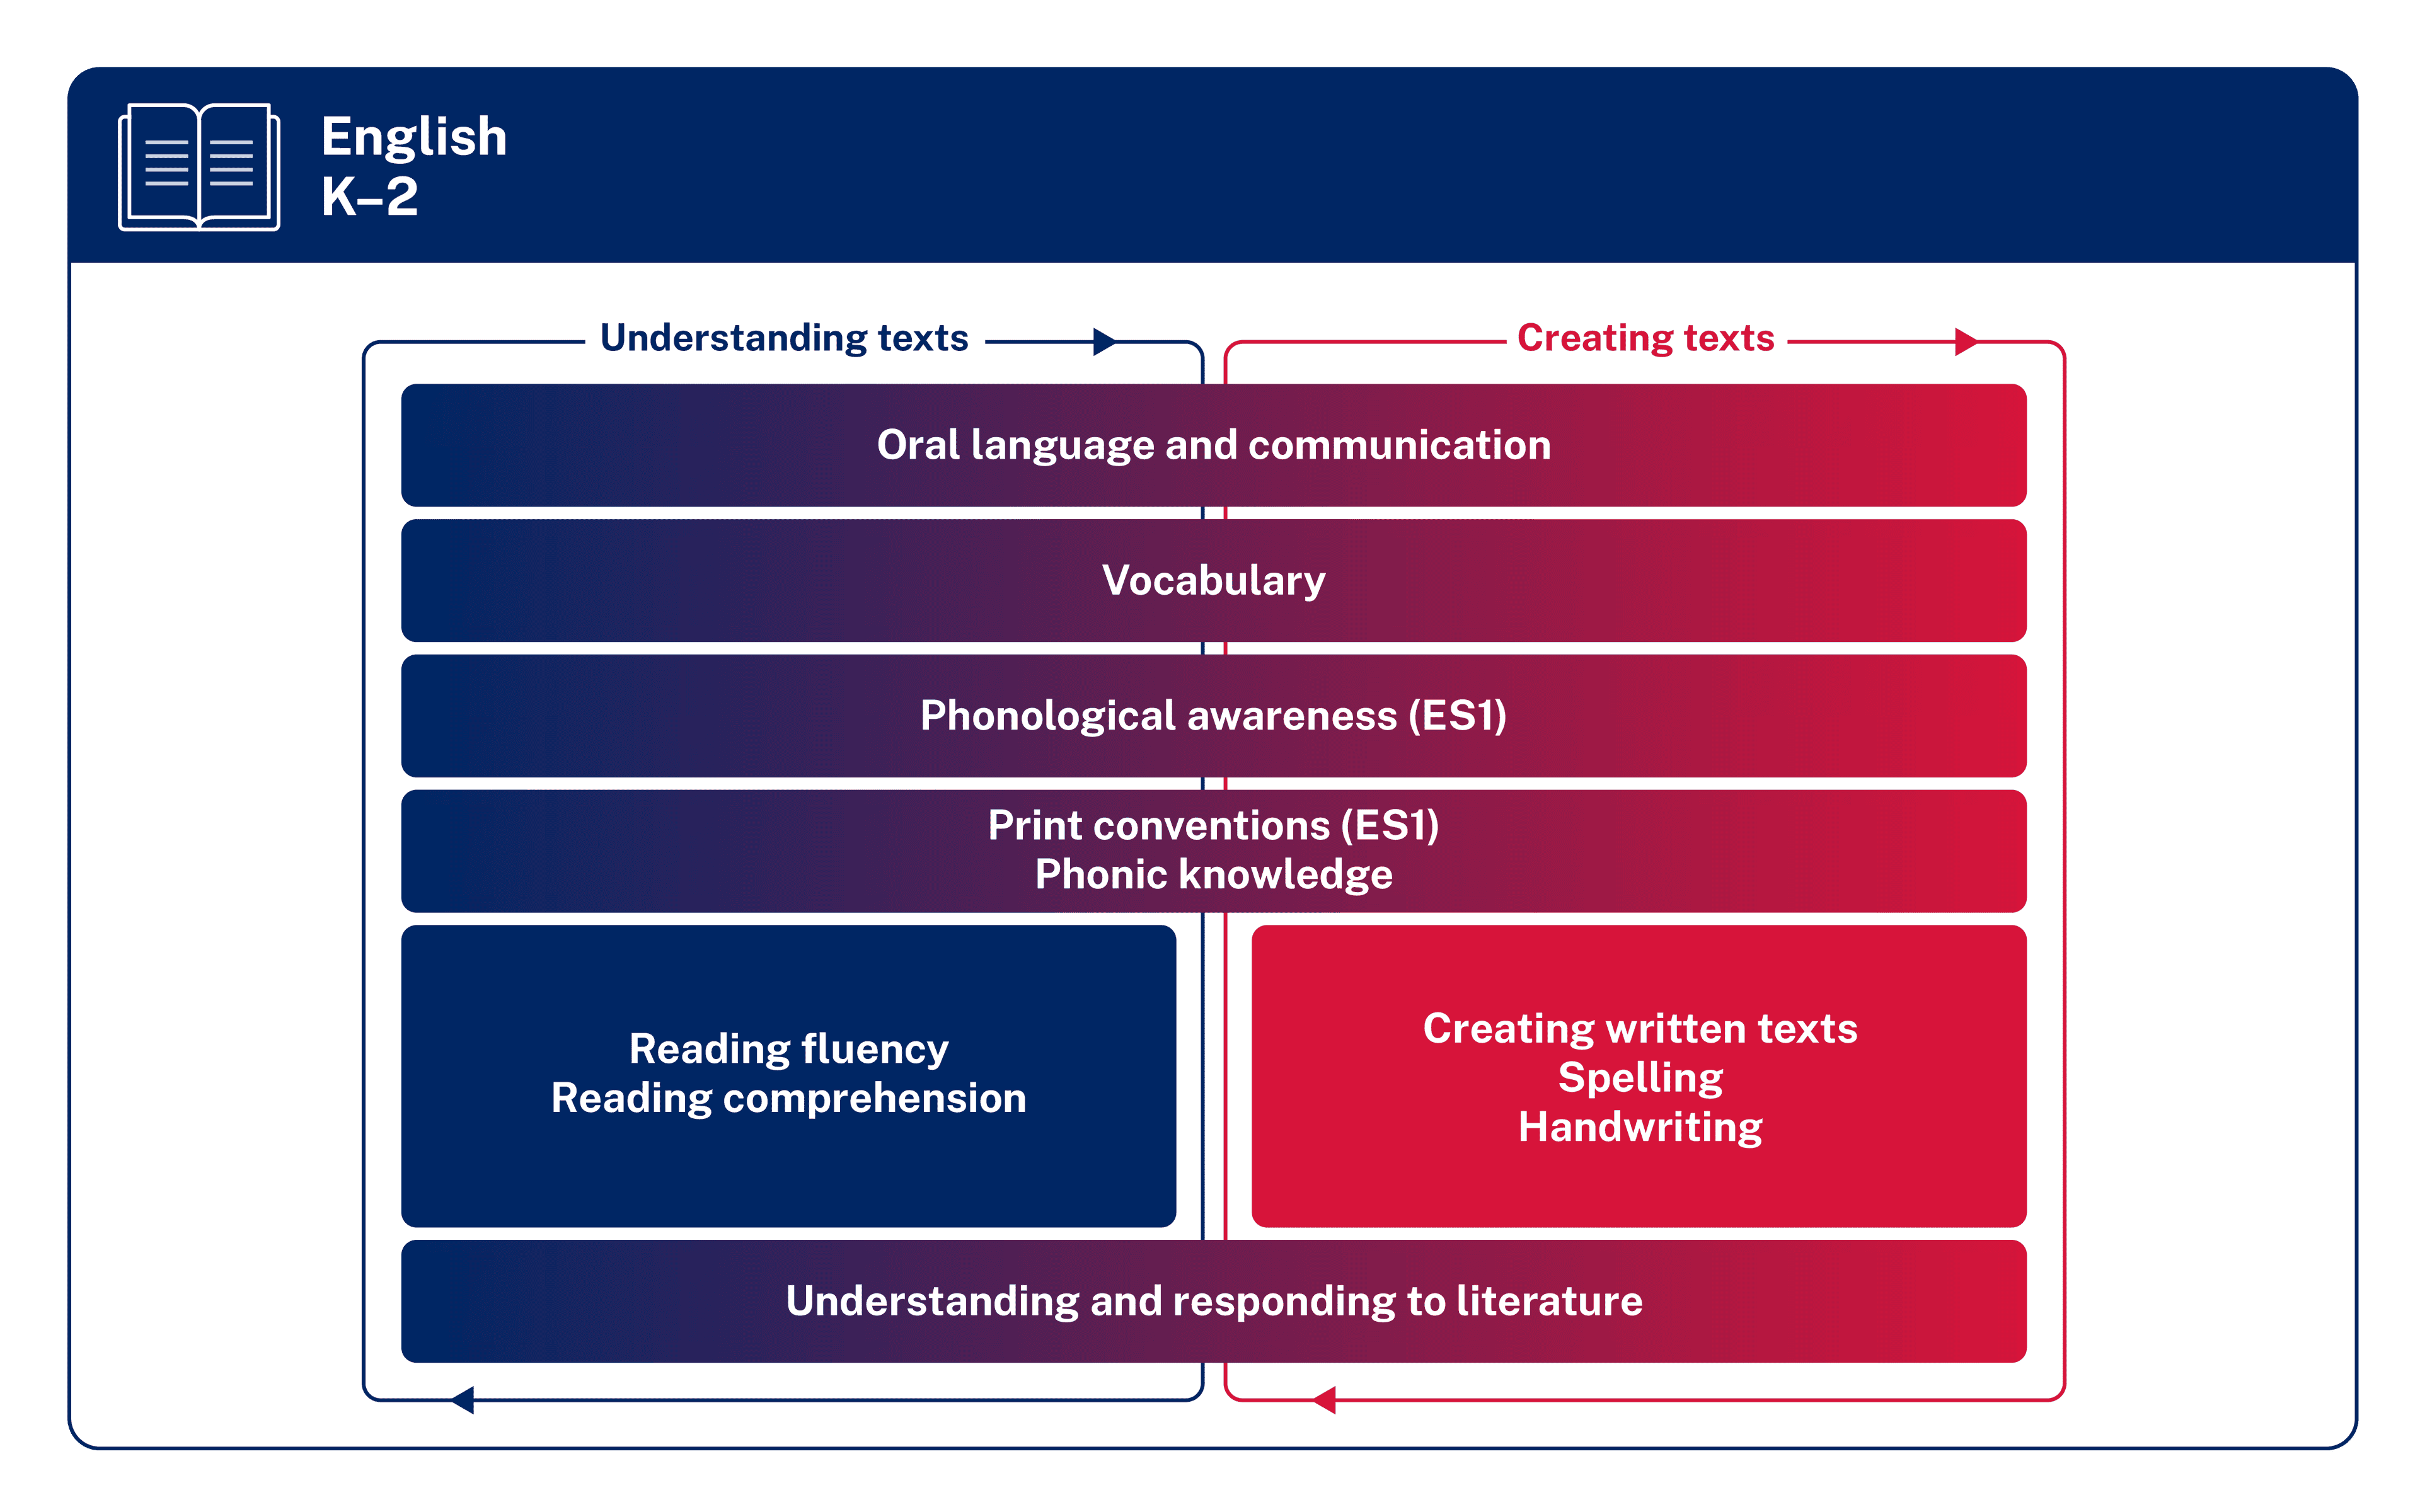 Overview of English K–2 which shows the syllabus outcomes.